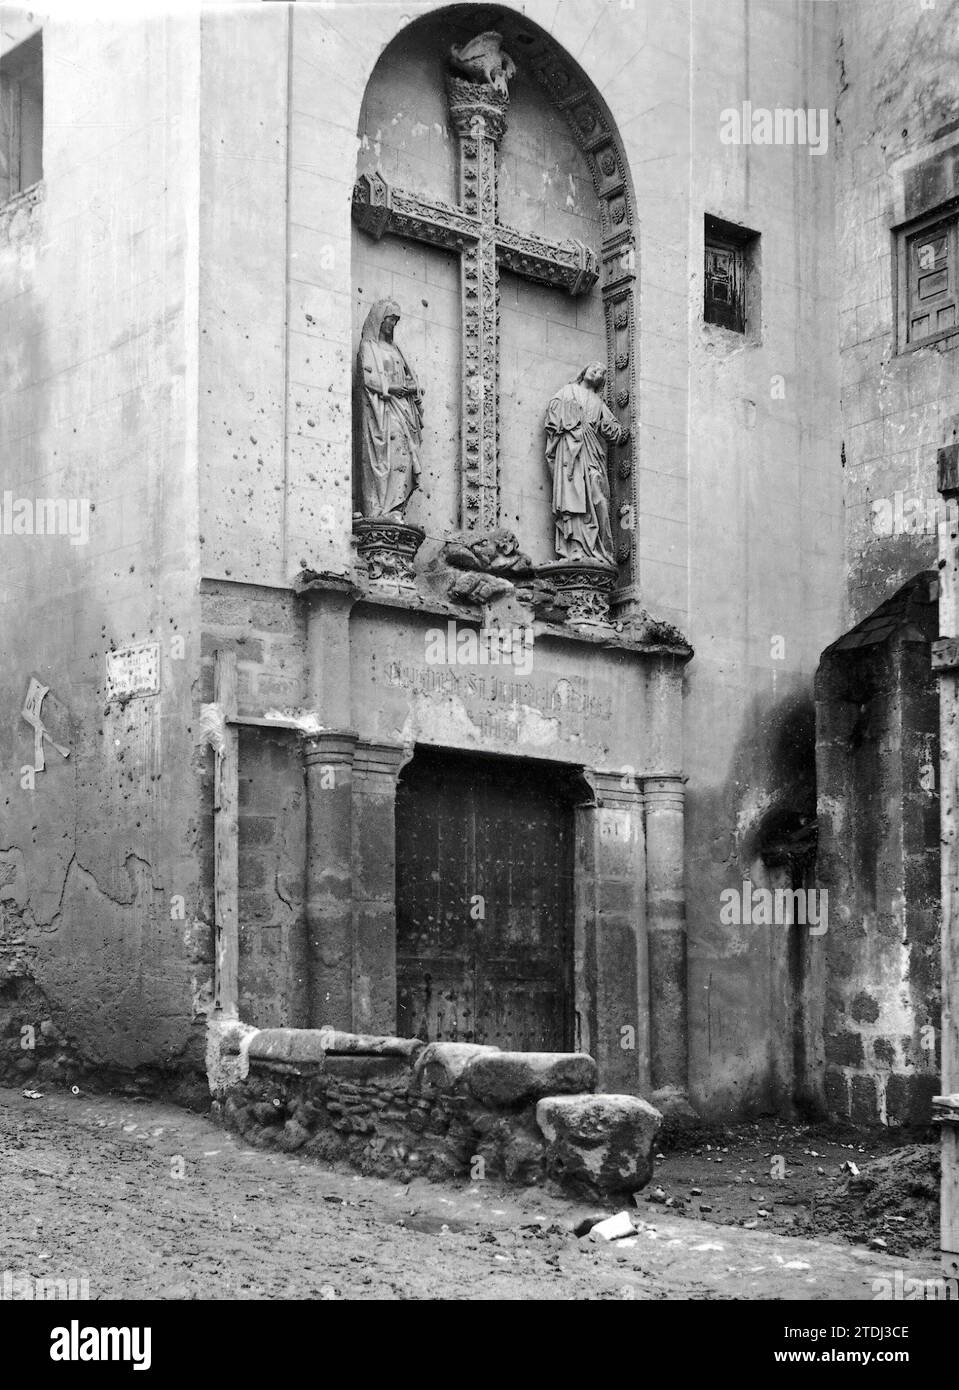 10/31/1922. Toledo. A lawsuit that interests the noble City.1. Interesting corner of the old convent of San Juan de los Reyes, which is intended to be demolished. (photo Pedro Román) -. Credit: Album / Archivo ABC / Pedro Román Stock Photo